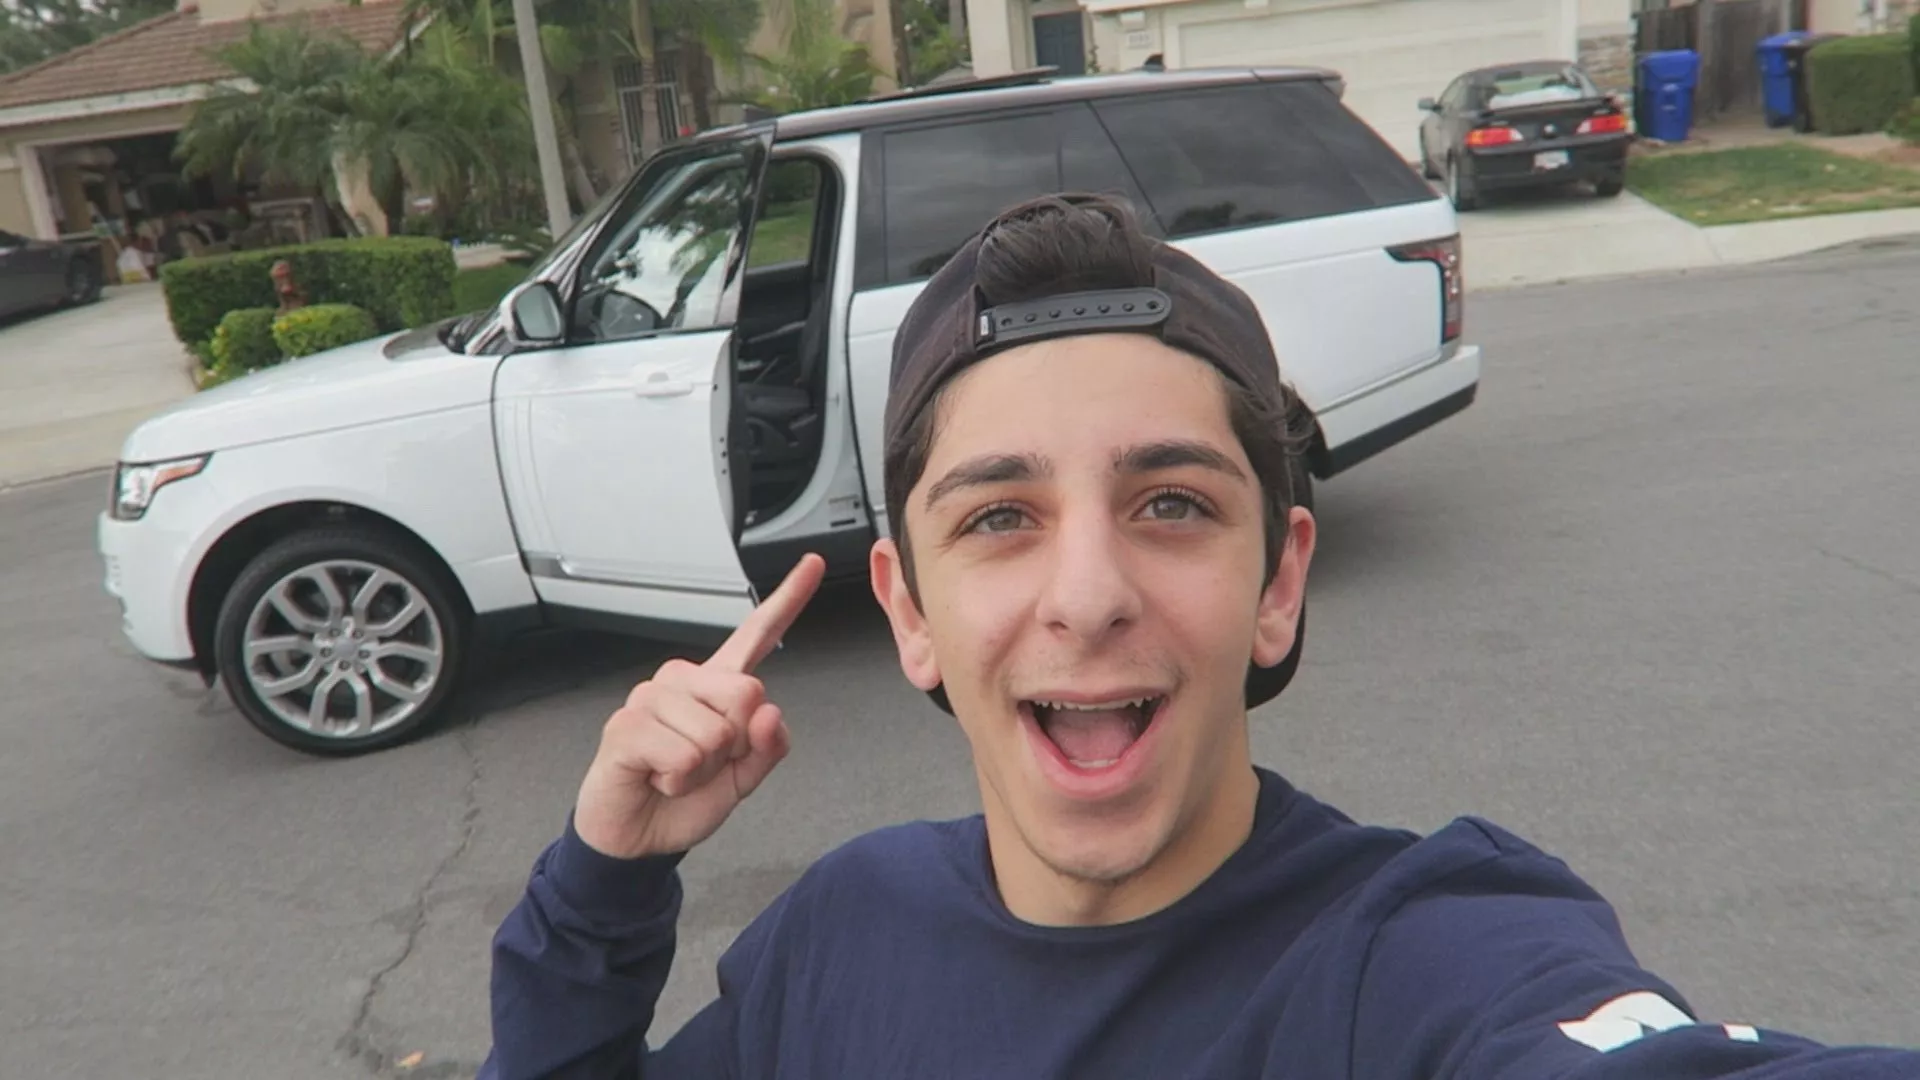 FaZe Rug is an American Youtube star known for his eponymous YouTube Channe...